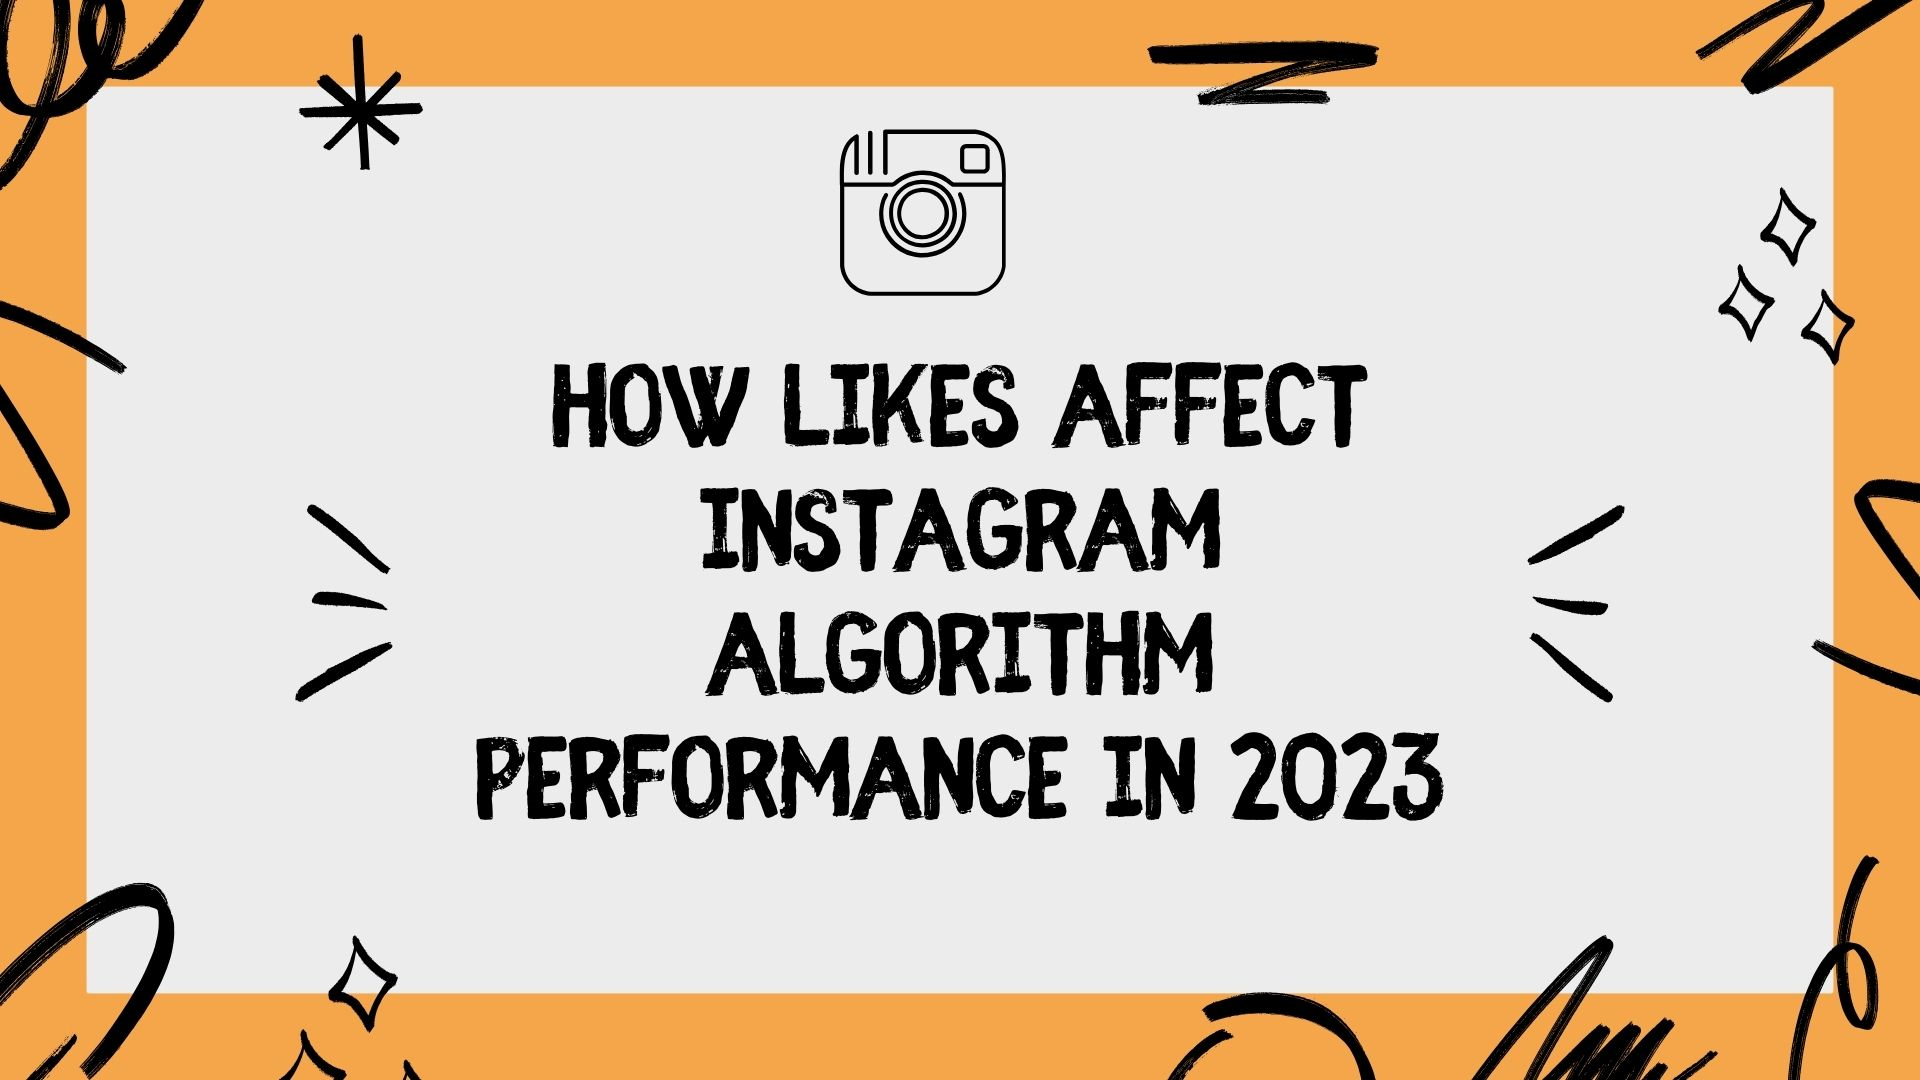 How Likes Affect Instagram Algorithm Performance in 2023